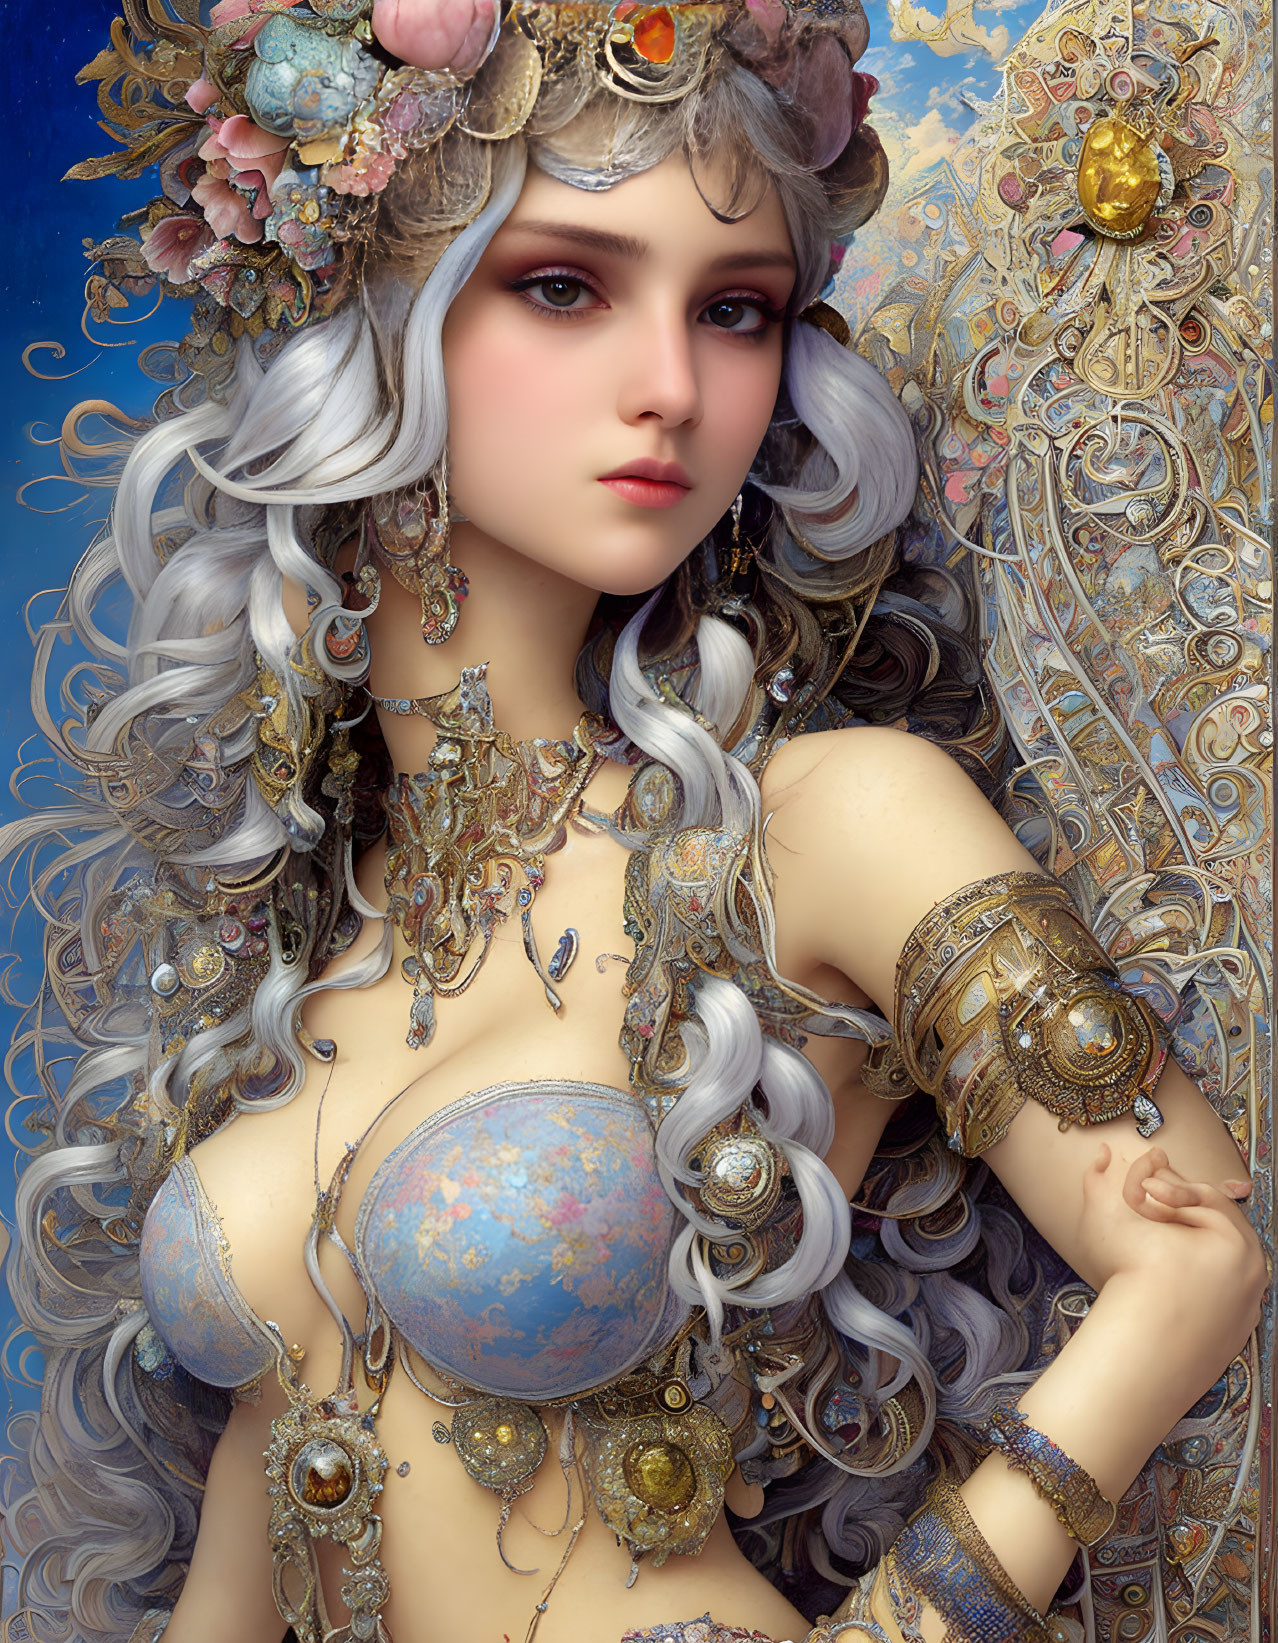 Fantasy woman with long silver hair and floral headpiece in ornate attire